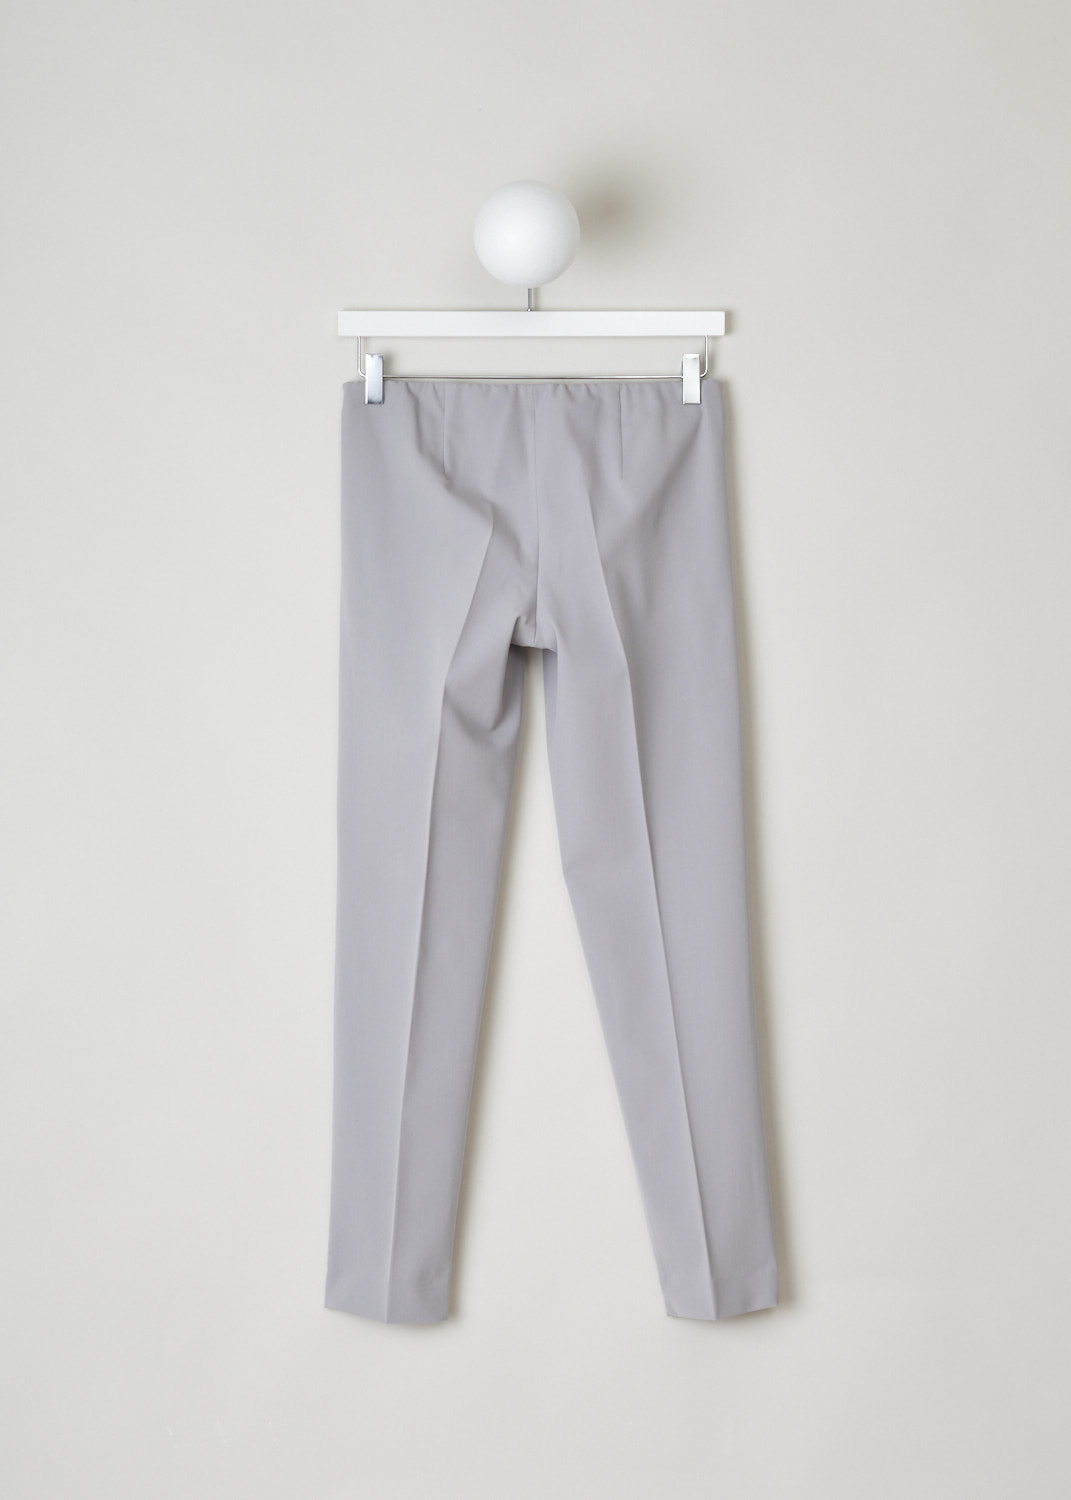 Brunello Cucinelli, Light grey pants with an elastic waist, MA051P1794_C2727, grey, back, Lovely light grey pants, make this beauty part your dailies. Comes without a waistband, but does has and elastic band for a comfy fit. 